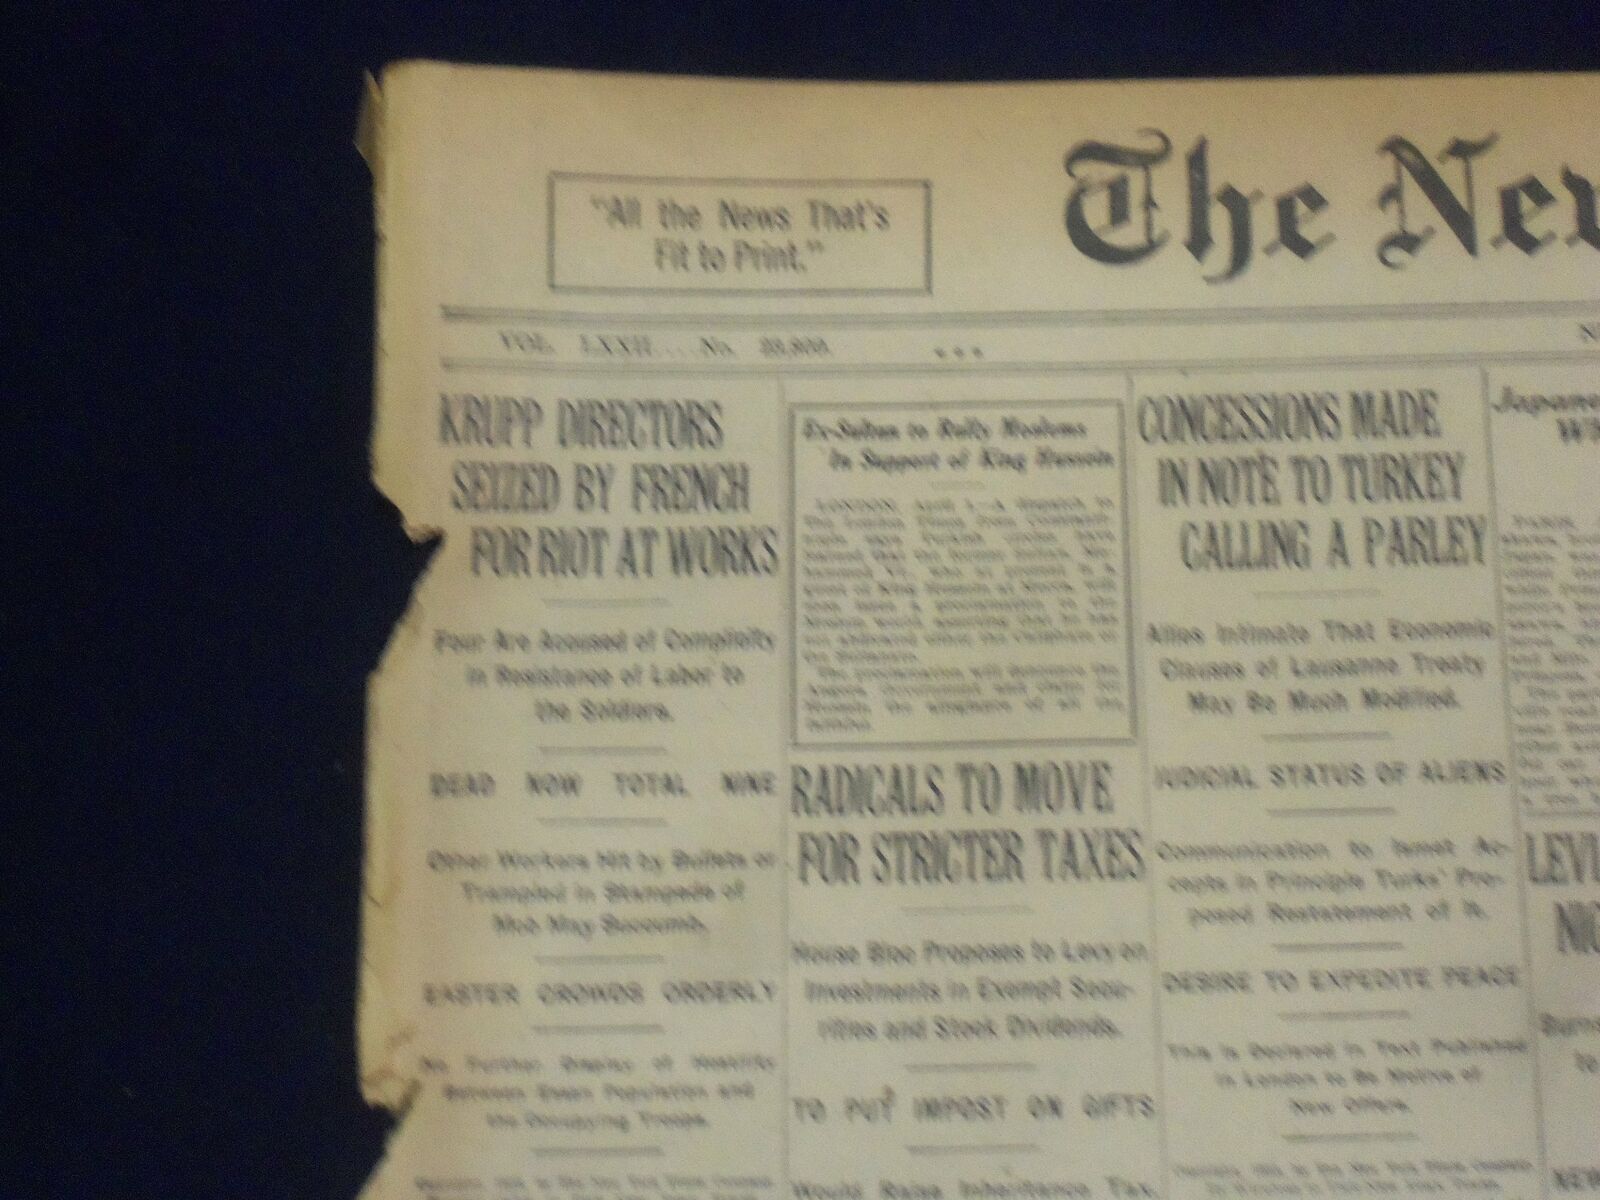 1923 APRIL 2 NEW YORK TIMES - DRUPP DIRECTORS SEIZED BY FRENCH - NT 8332